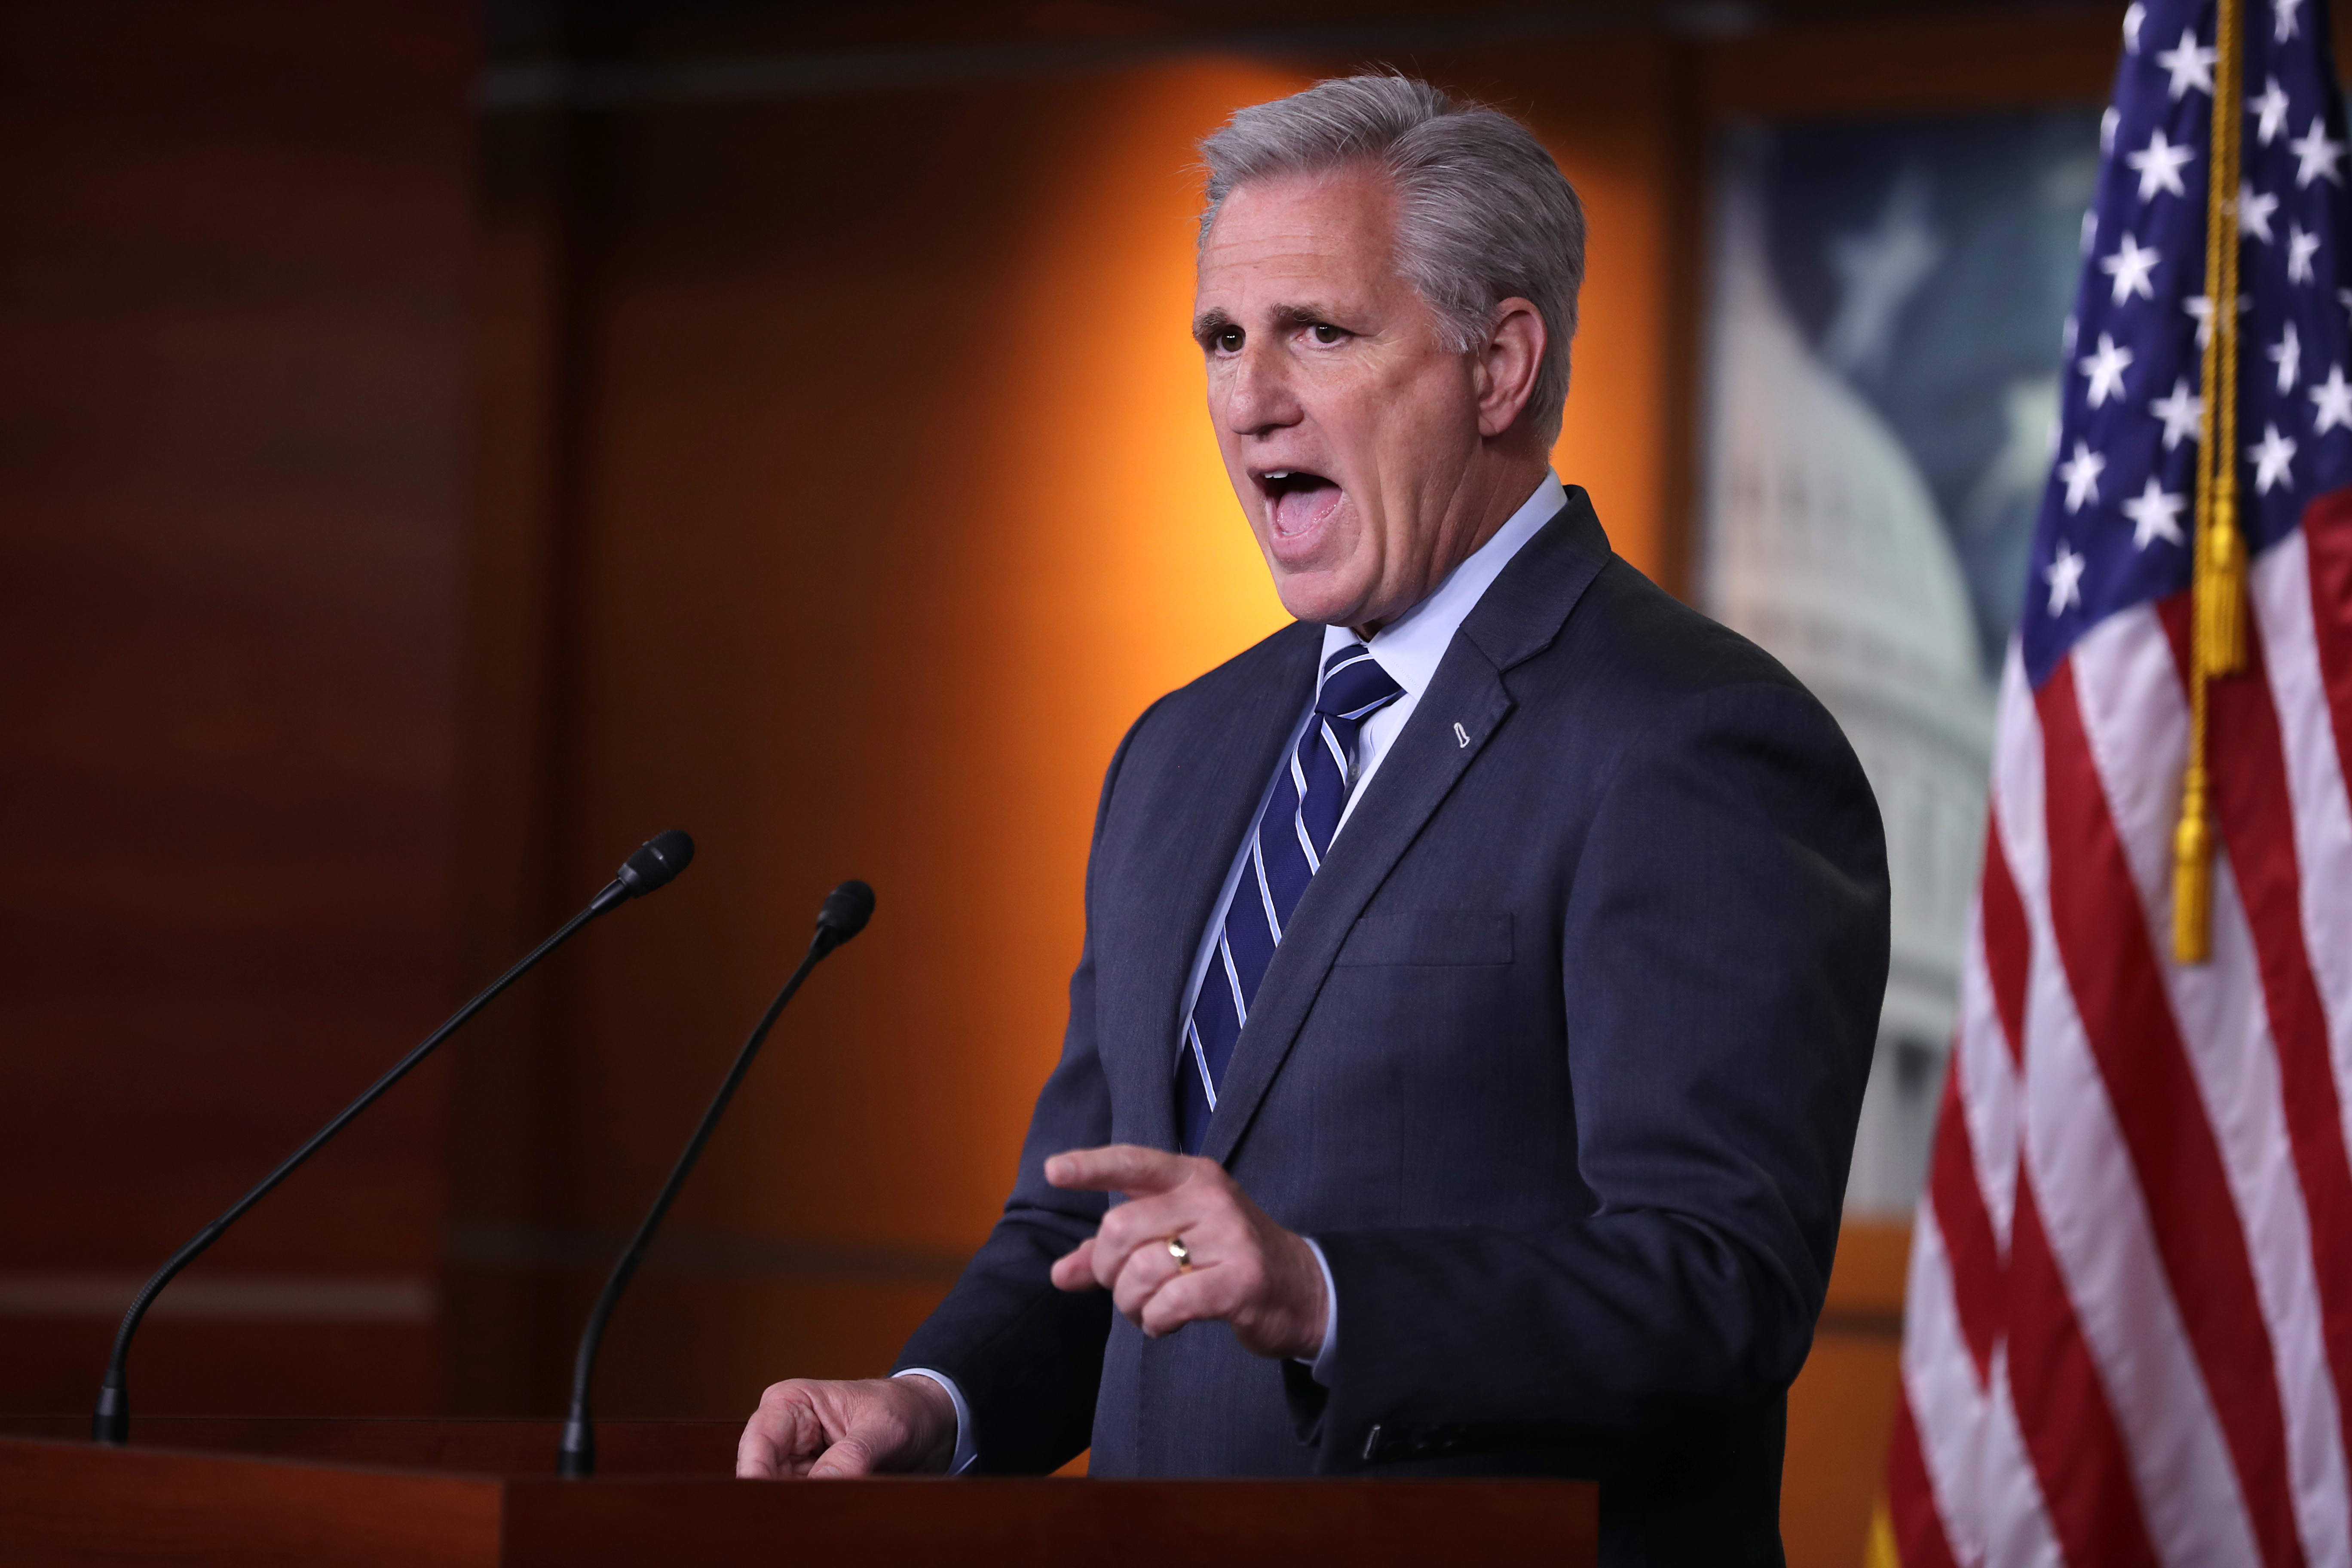 WASHINGTON, DC - JUNE 13: House Minority Leader Kevin McCarthy (R-CA) holds his weekly news conference at the U.S. Capitol June 13, 2019 in Washington, DC. In the wake of remarks by President Donald Trump that he would accept compromising information about a political opponent from a foreign power, McCarthy said that he would support legislation proposed by Democrats that would require people to report to the FBI if they are approached with offers of that information. (Photo by Chip Somodevilla/Getty Images)